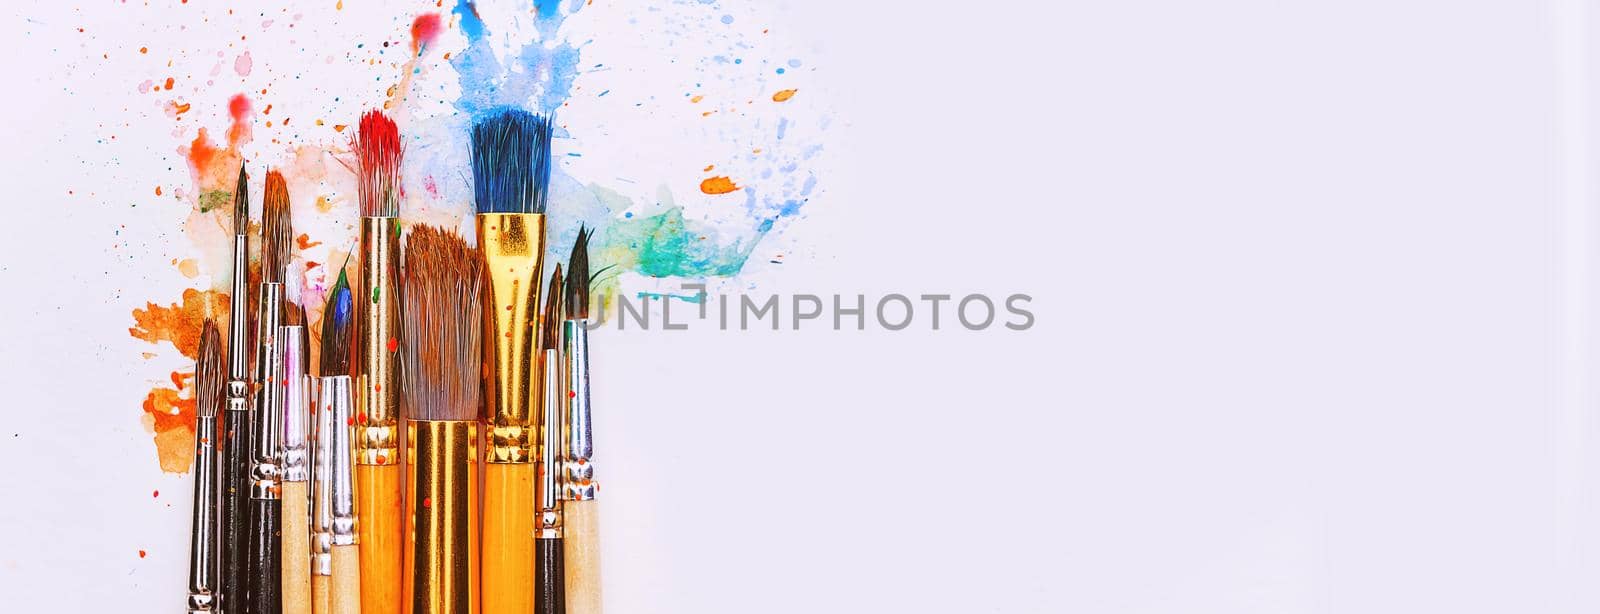 artistic brushes on wooden background by vvmich